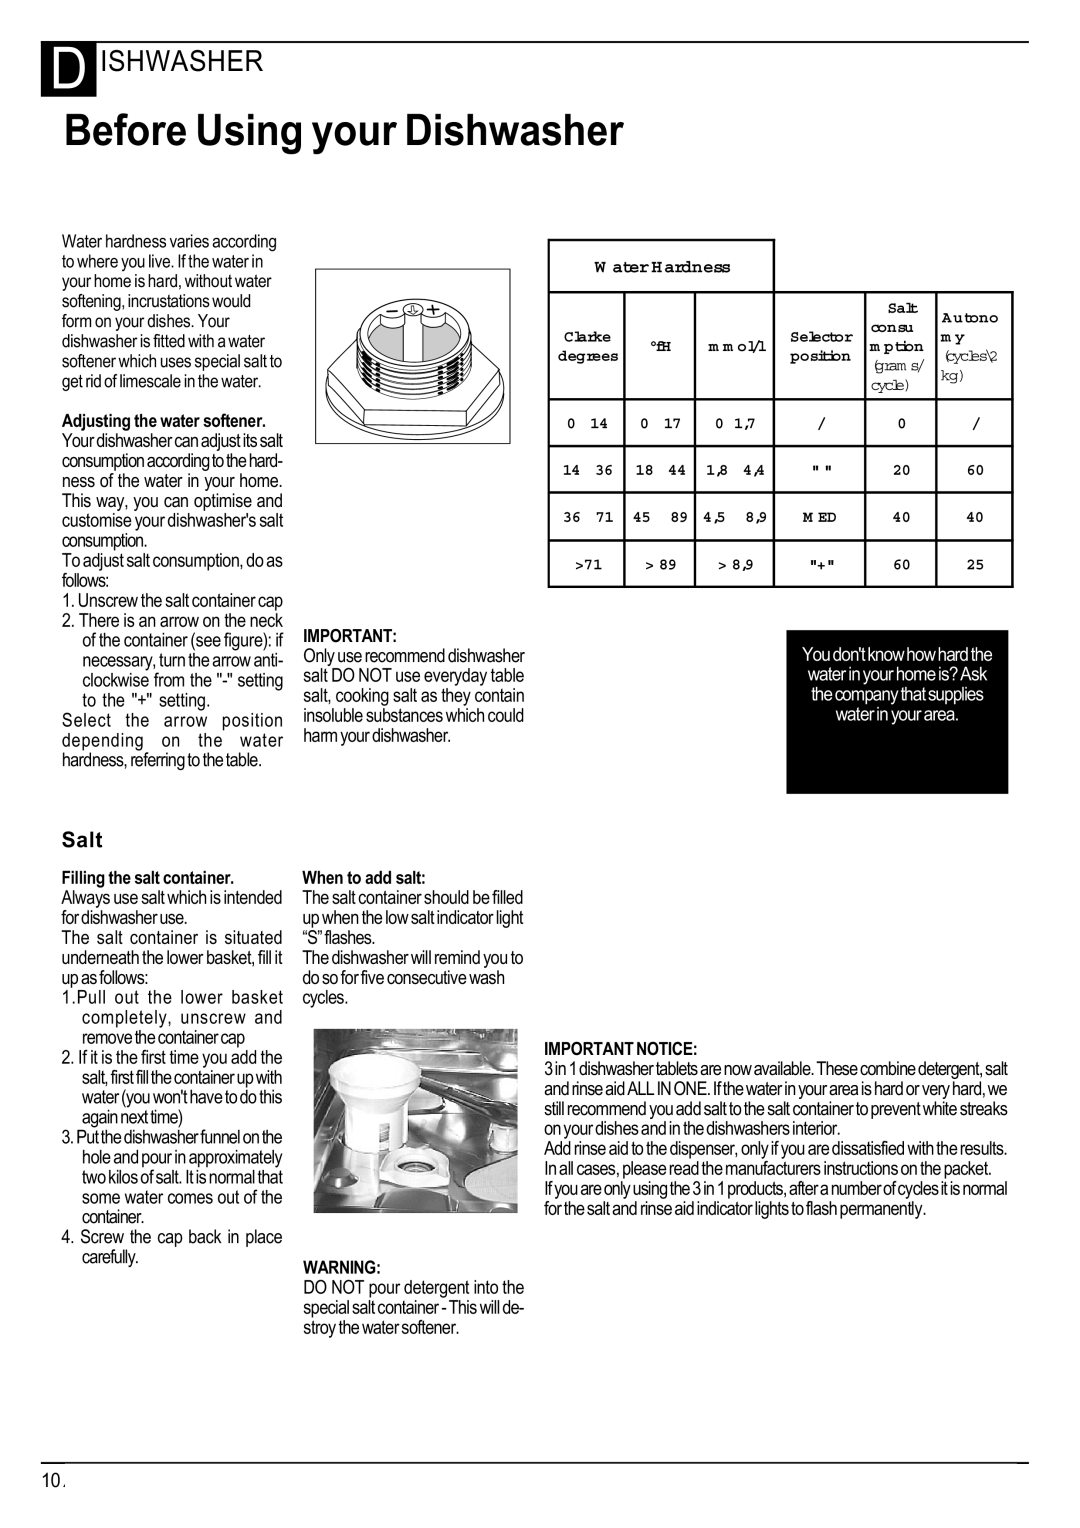 Hotpoint Instructions manual Before Using your Dishwasher, D Ishwasher, Salt, to the + setting, Filling the salt container 